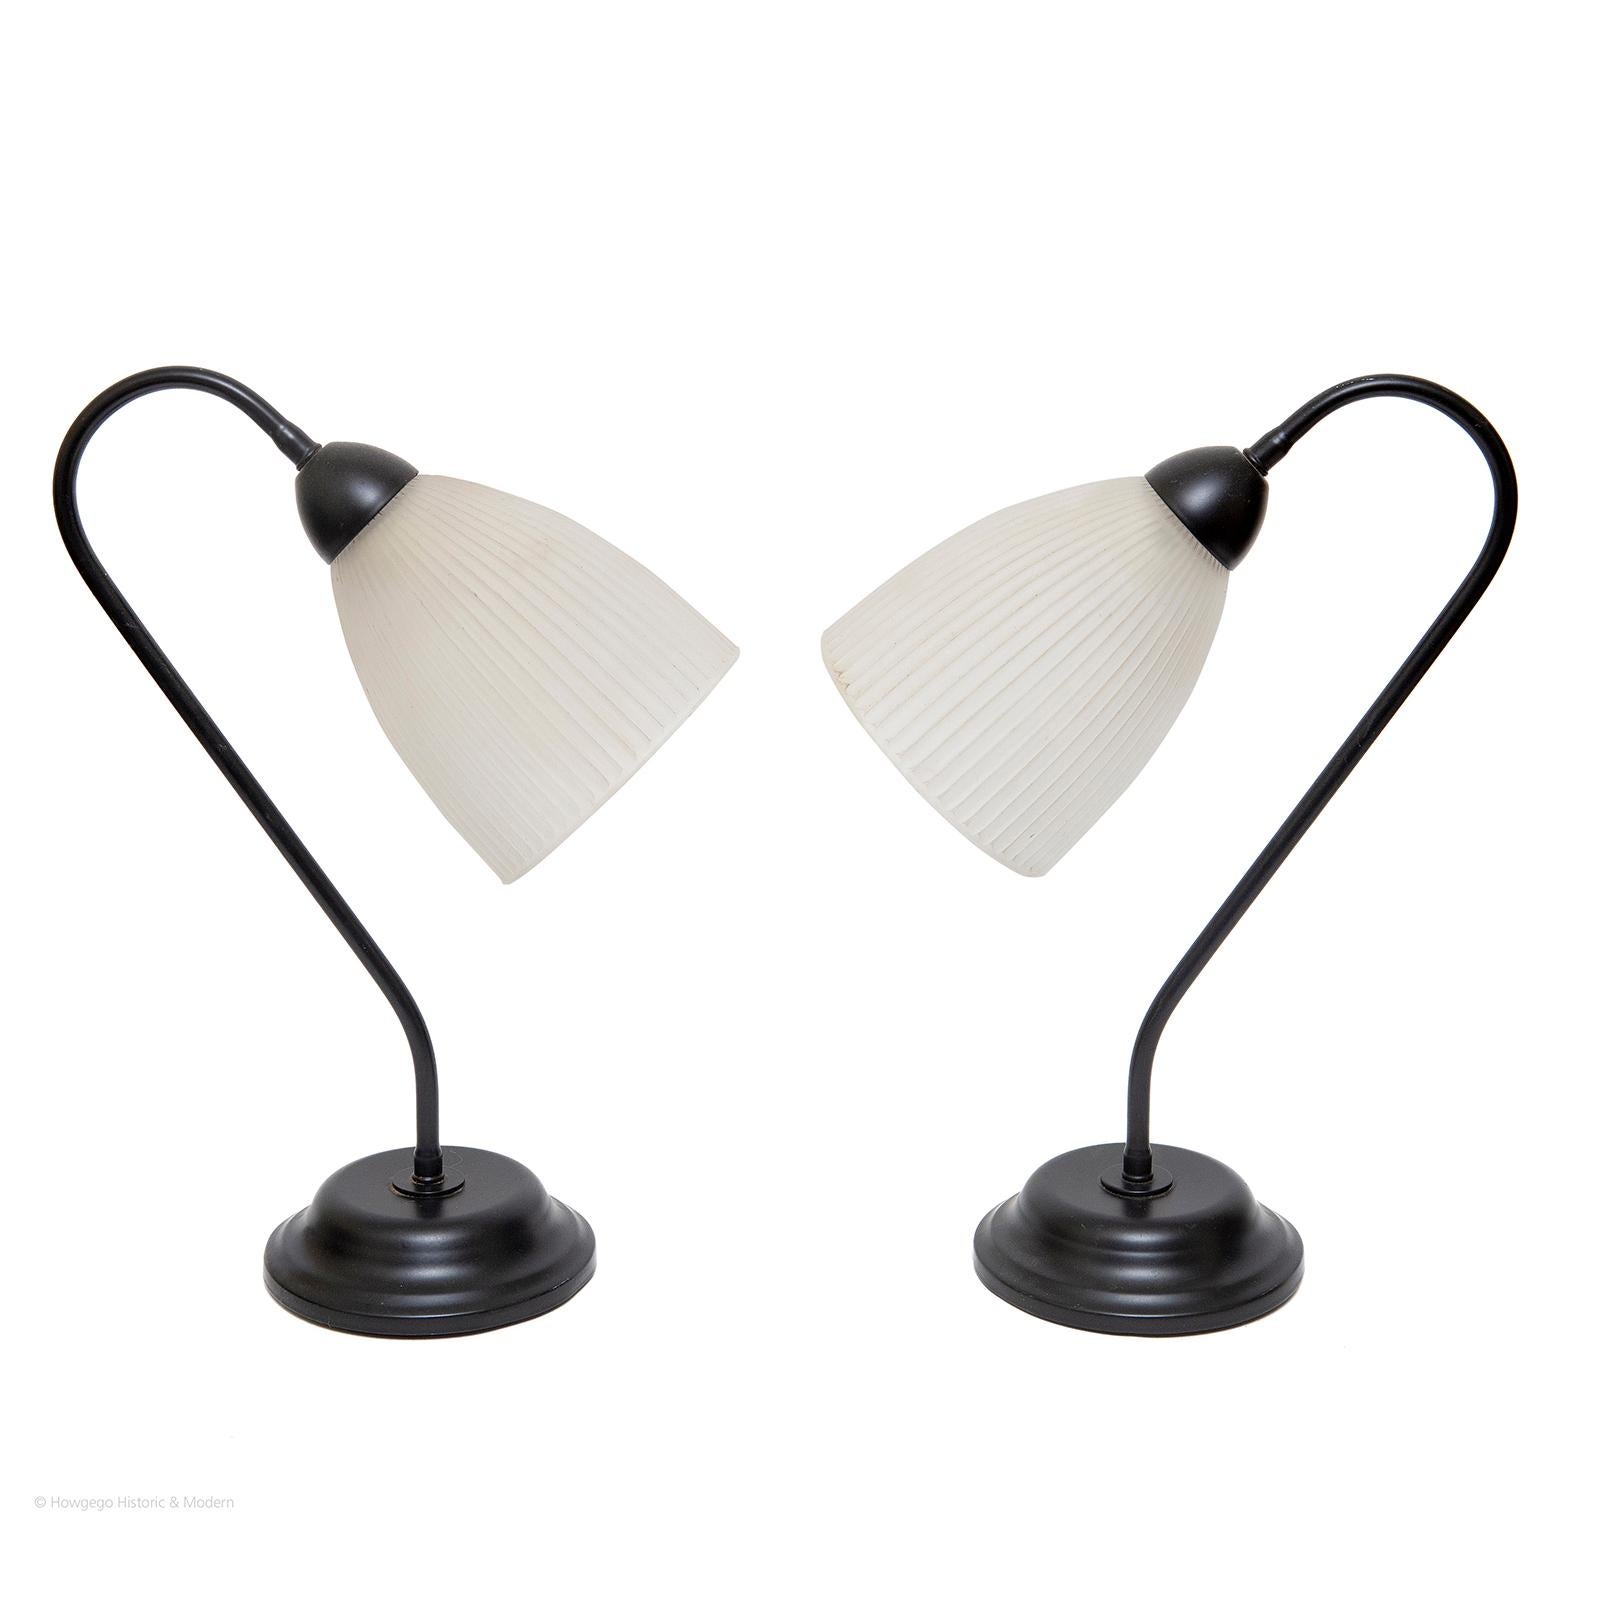 Pair of vintage painted black, metal gooseneck task lamps with original glass shades, 15” high.
Original glass shades
Not adjustable
20th Century conversion to electricity.
Pricing £1,000

Measures: height 38.5cm, 15 inches, 
Base diameter 14